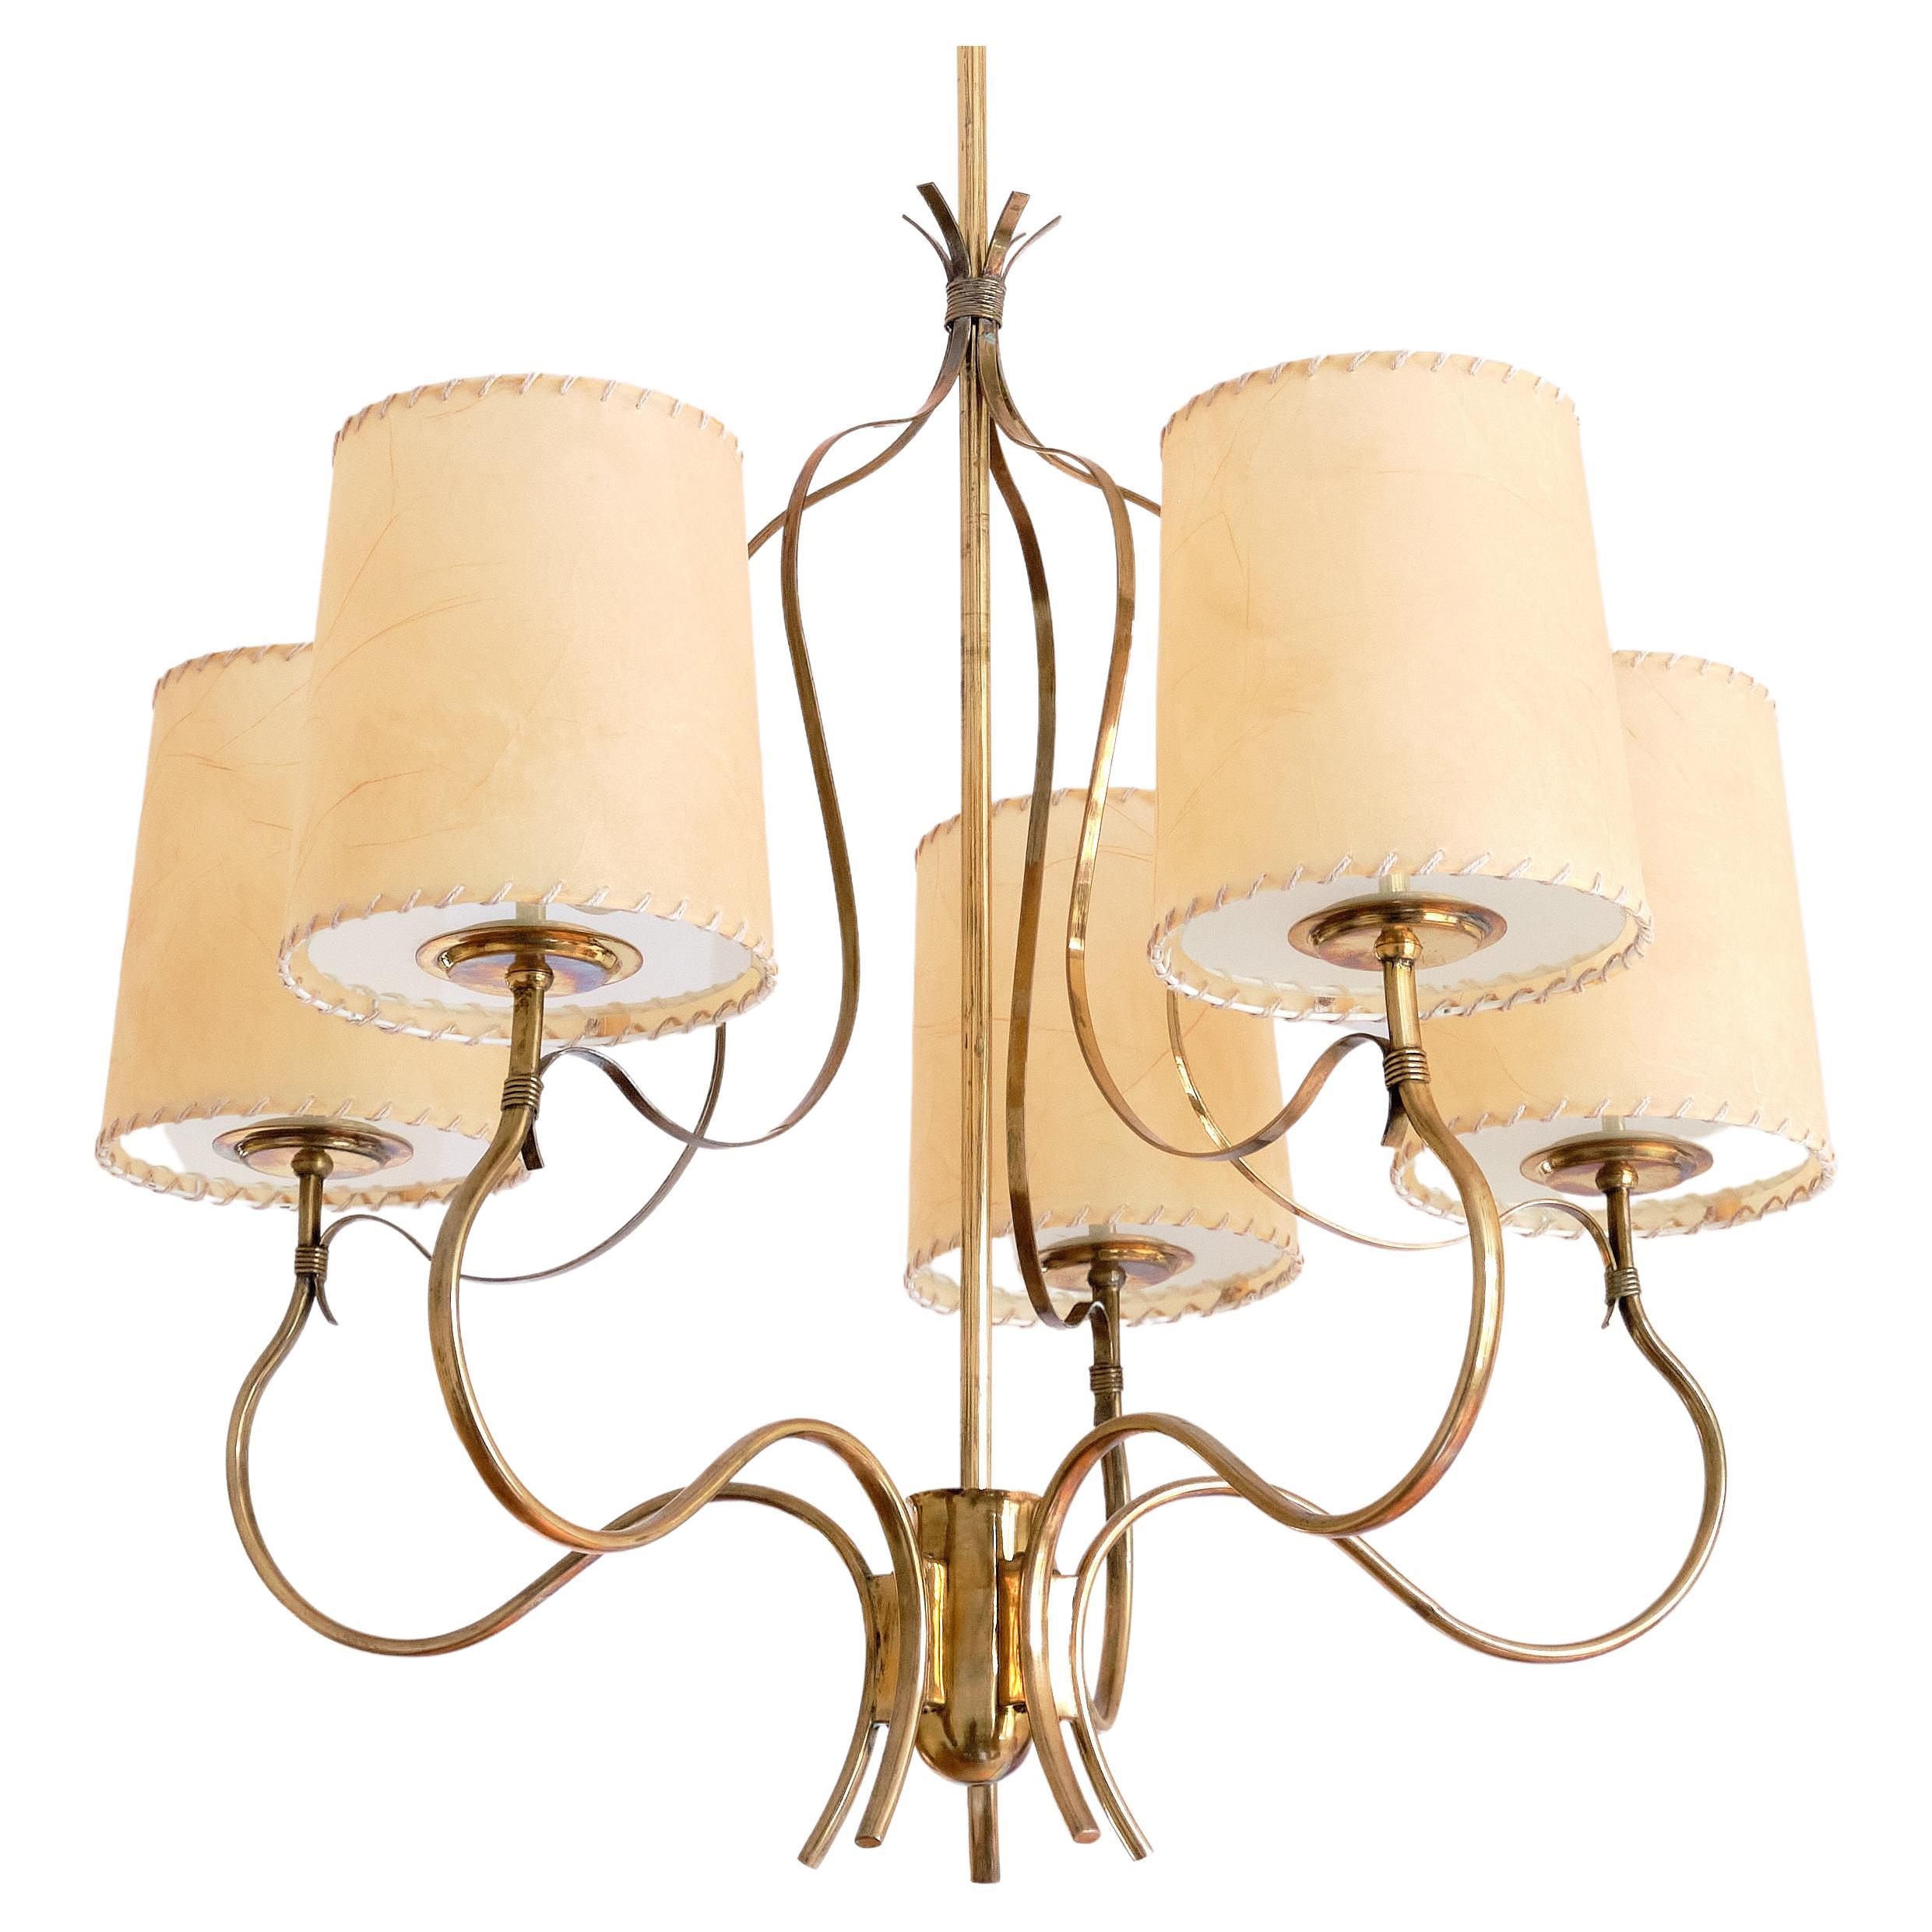 Paavo Tynell Chandelier in Brass and Parchment, Model 9001, Taito Finland, 1940s For Sale